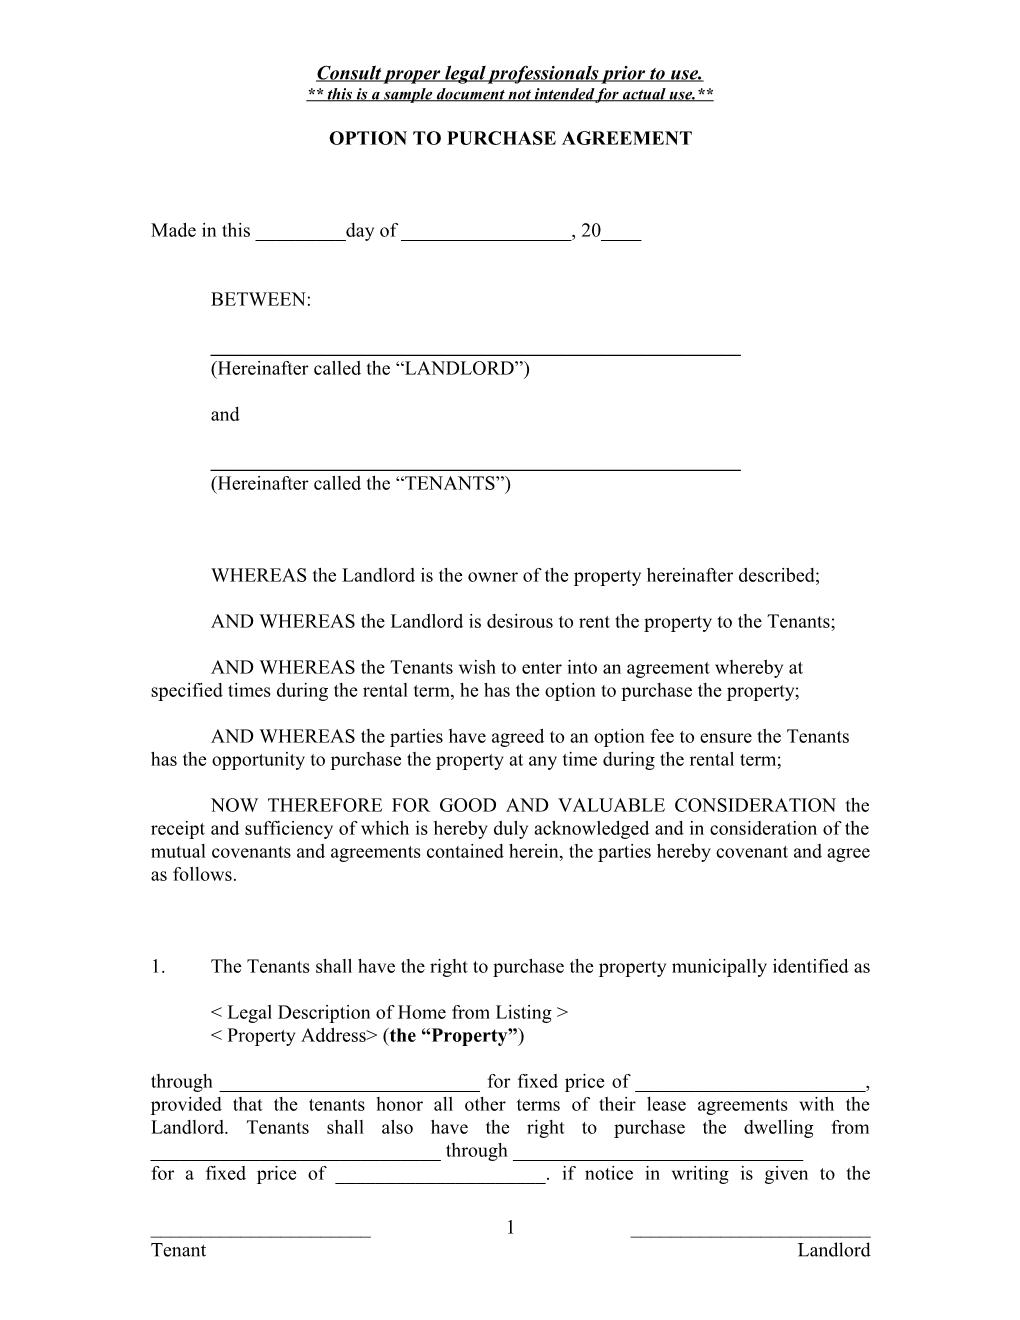 Option to Purchase Agreement